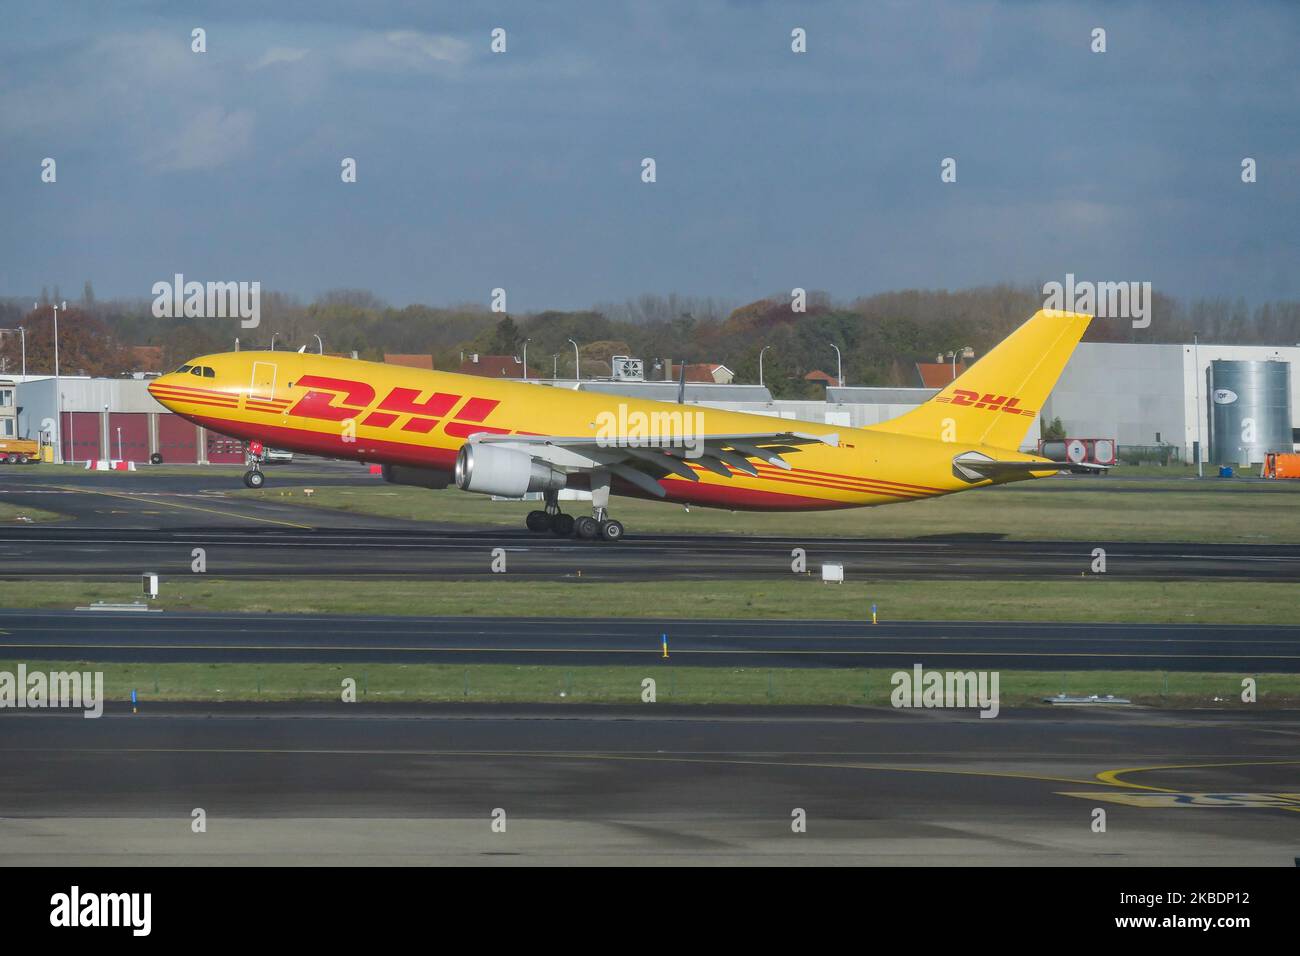 DHL Aviation - EAT Leipzig - European Air Transport Airbus A300 Cargo airplane as seen during take off on rotation phase at Brussels Zaventem International Airport BRU EBBR in Belgium. The A300B4-622R(F) wide body freighter jet airplane has the registration D-AEAT. DHL aviation airways is part of DHL Express owned by Deutsche Post and provides Express Logistics, Air Freight based in Bonn, Germany. (Photo by Nicolas Economou/NurPhoto) Stock Photo